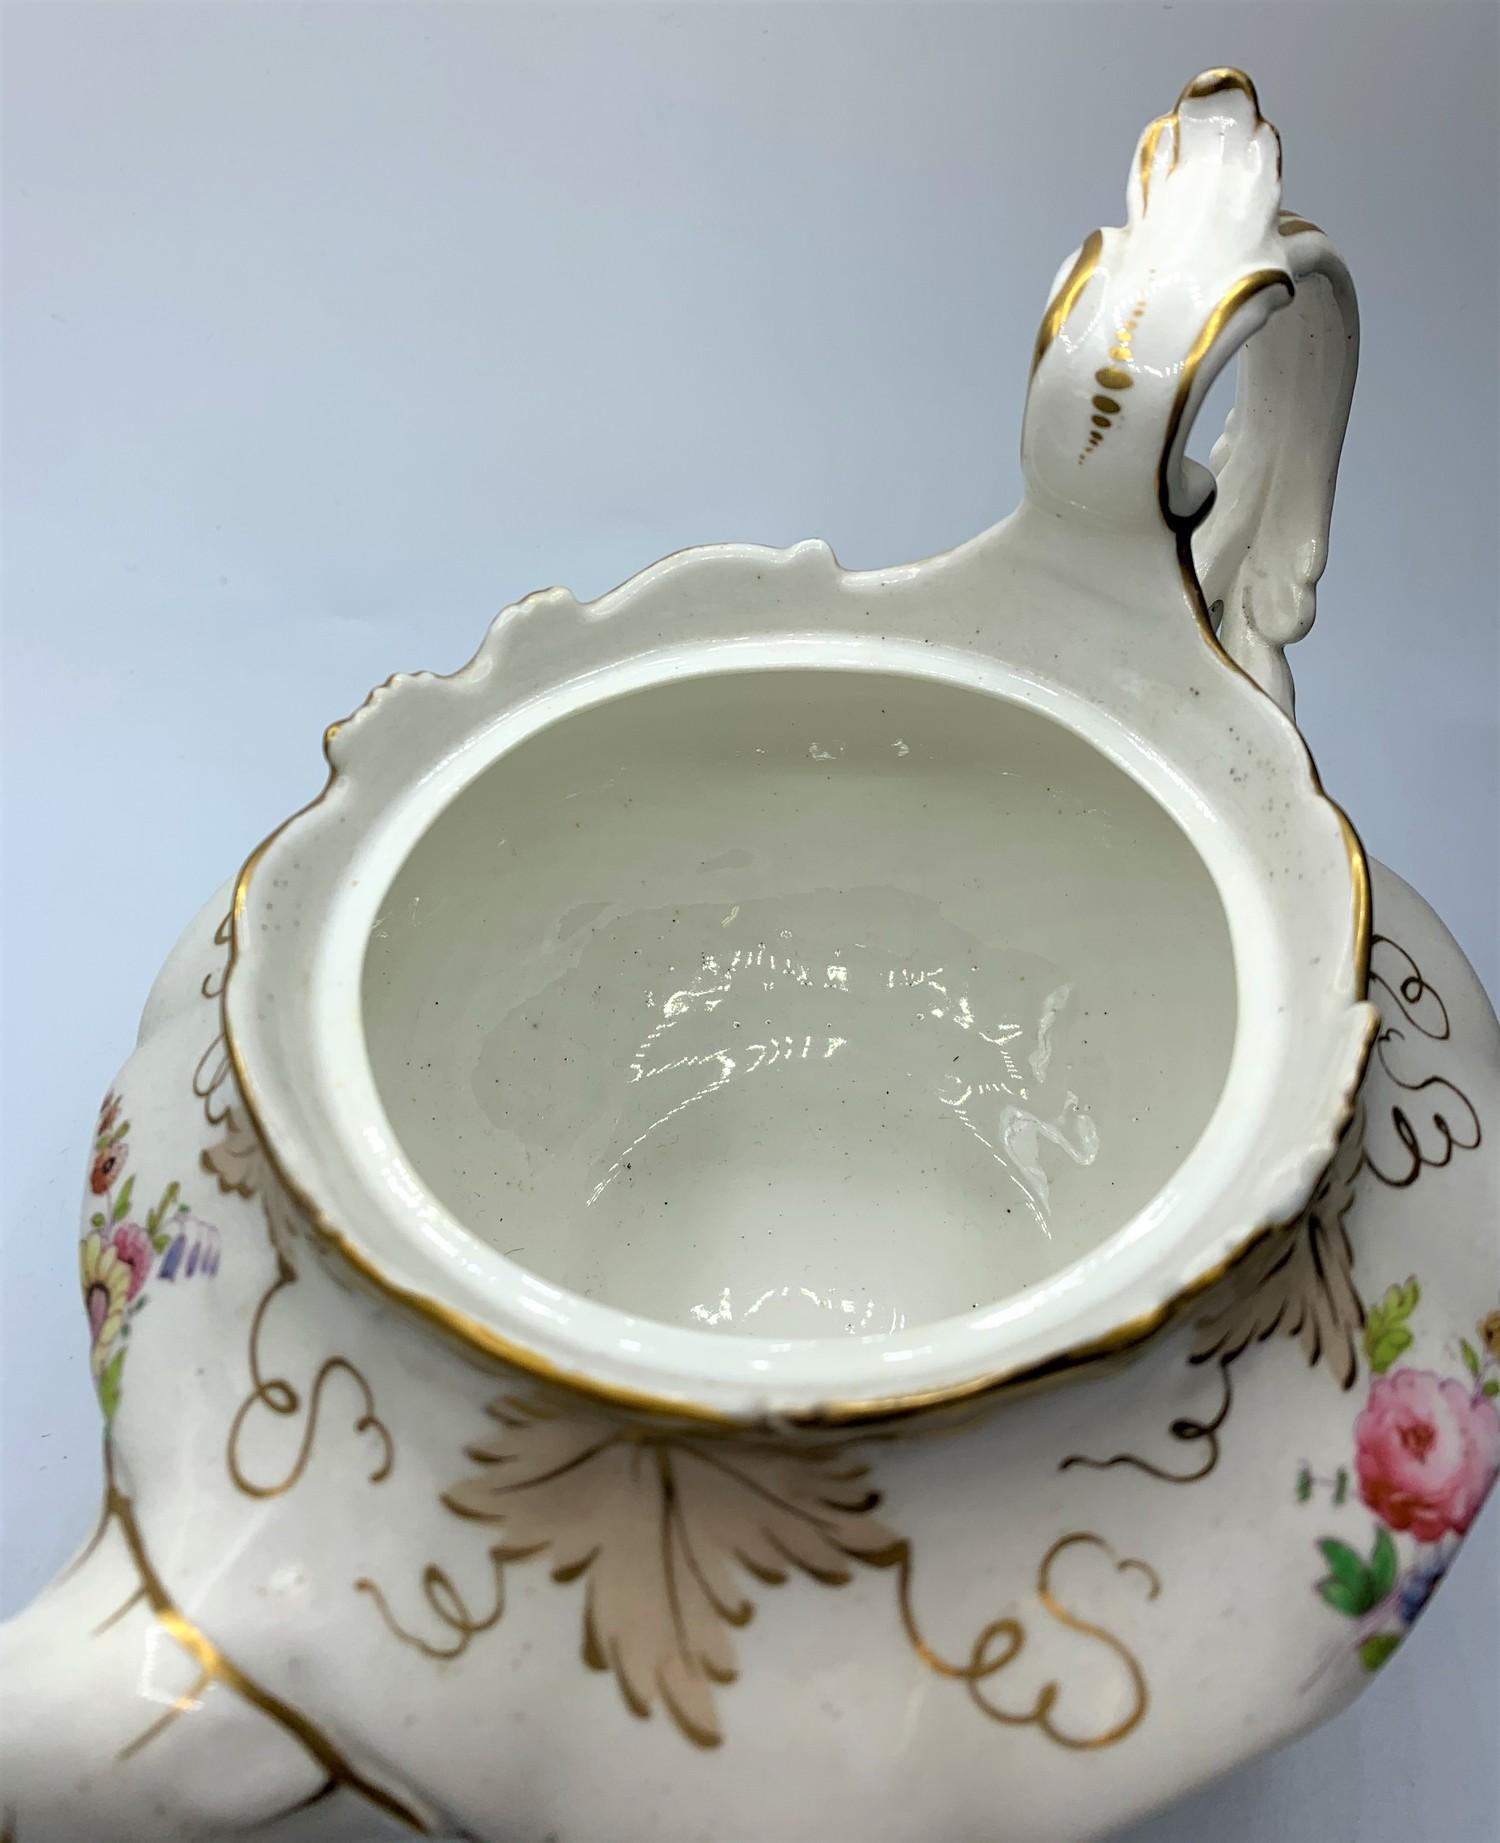 H&R Daniel Bath shape Teapot with Floral theme in good condition - Image 5 of 8